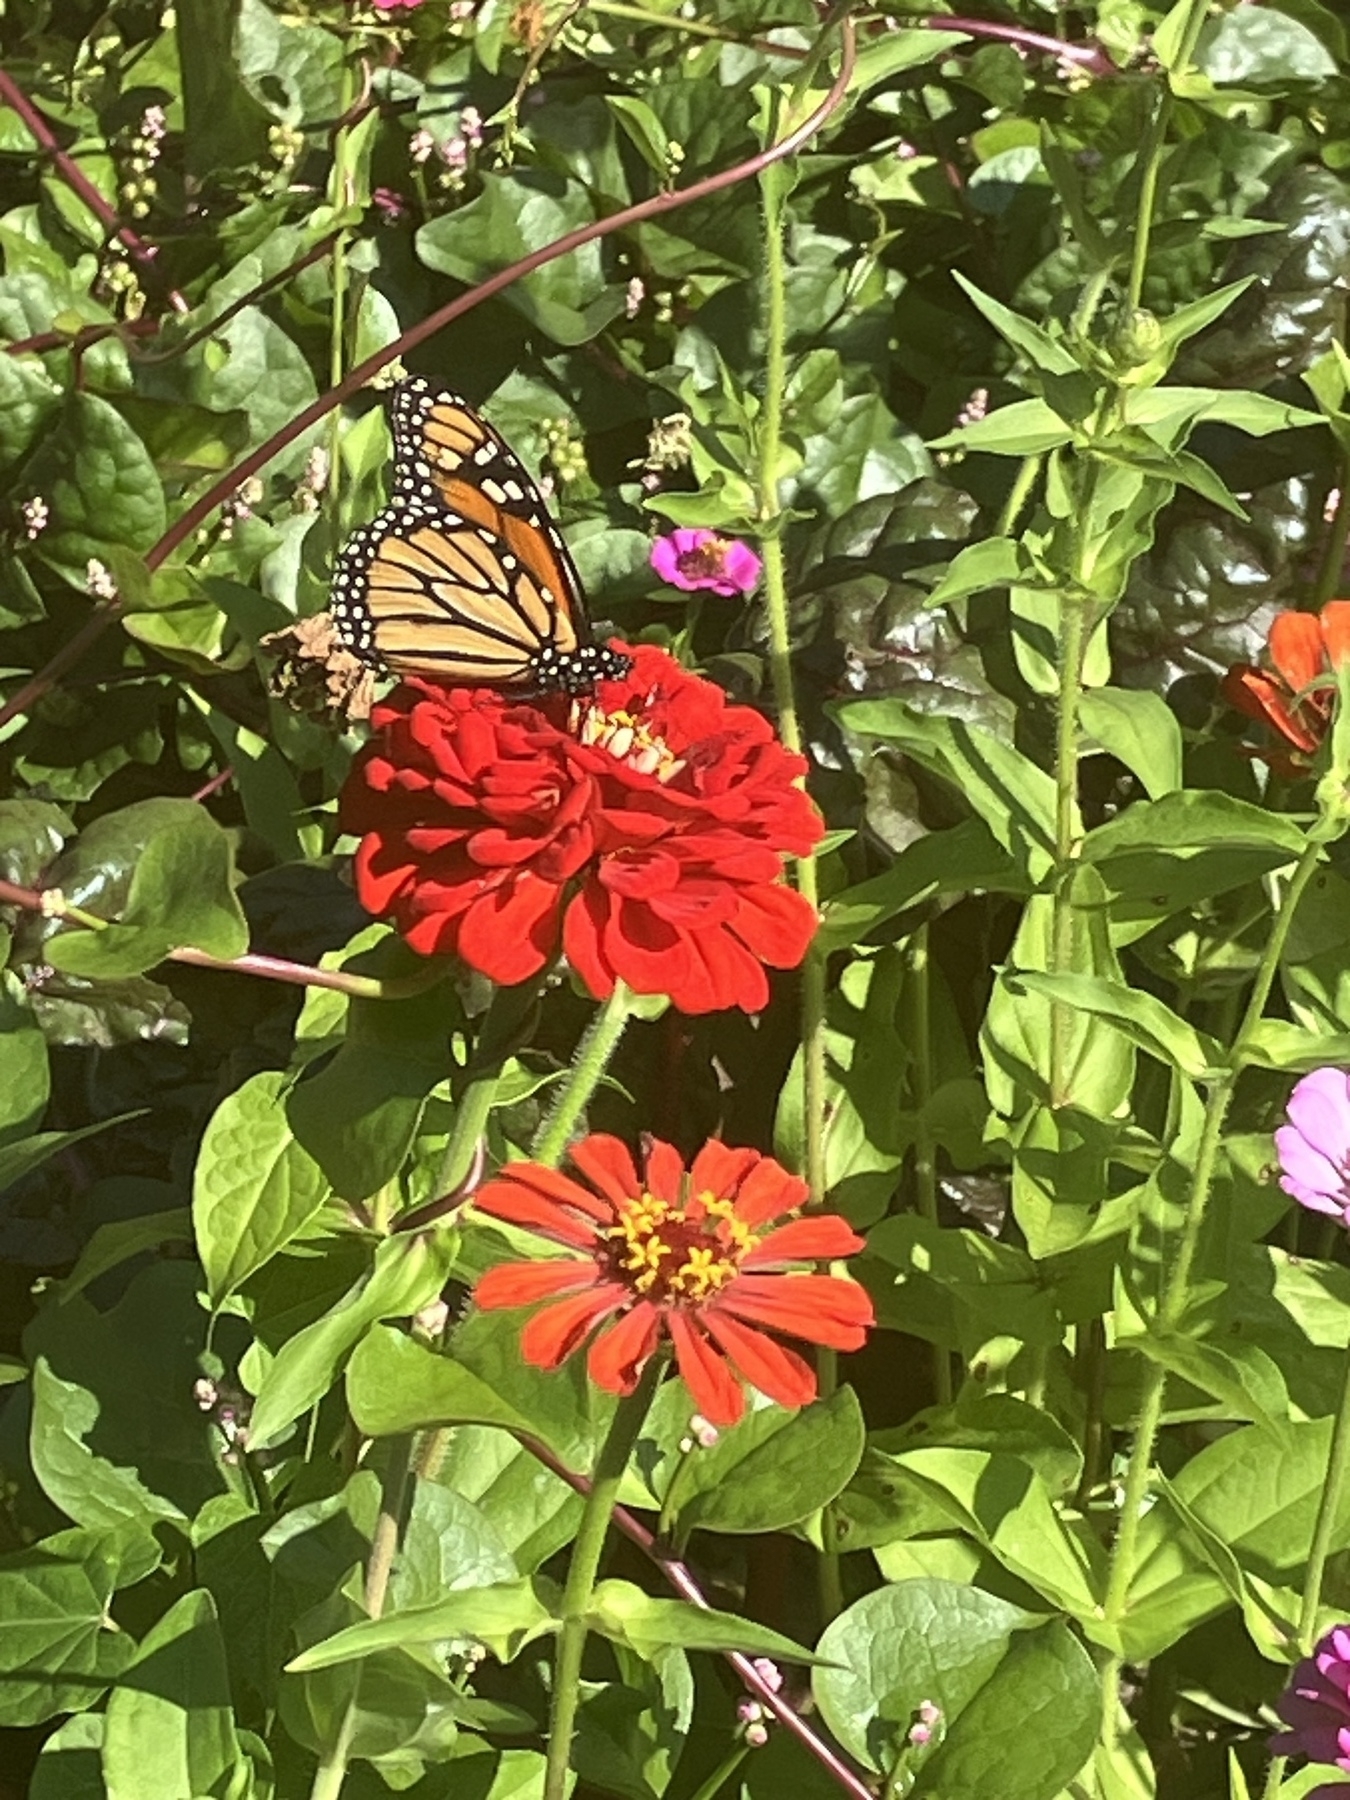 Monarch butterfly on red zinnia